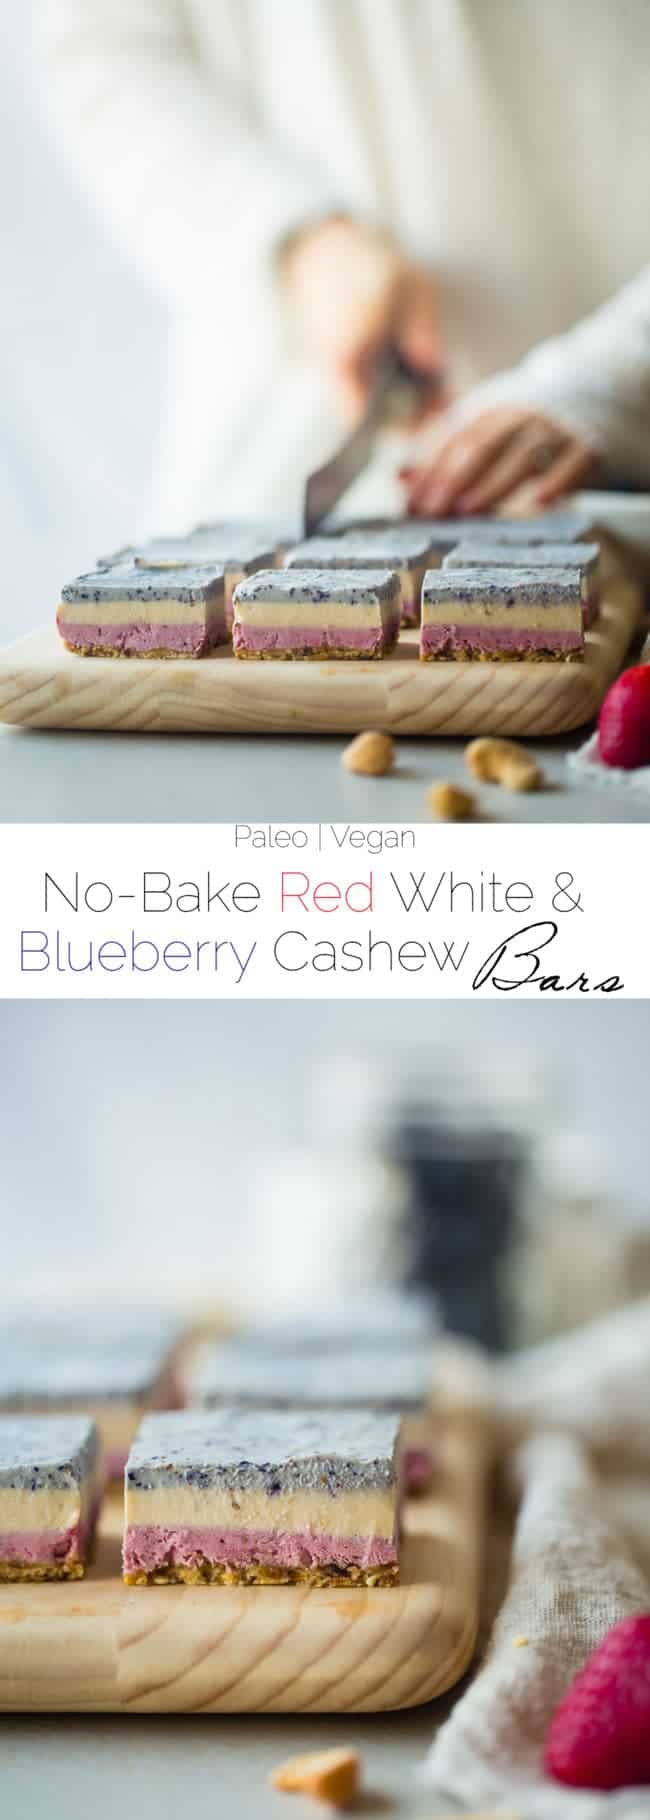 Vegan No Bake Red, White and Blueberry Cashew Cream Bars - These healthy bars are made of berry cashew cream, layered and then frozen! They're an easy, paleo and vegan friendly dessert for the fourth of July! | Foodfaithfitness.com | @FoodFaithFit